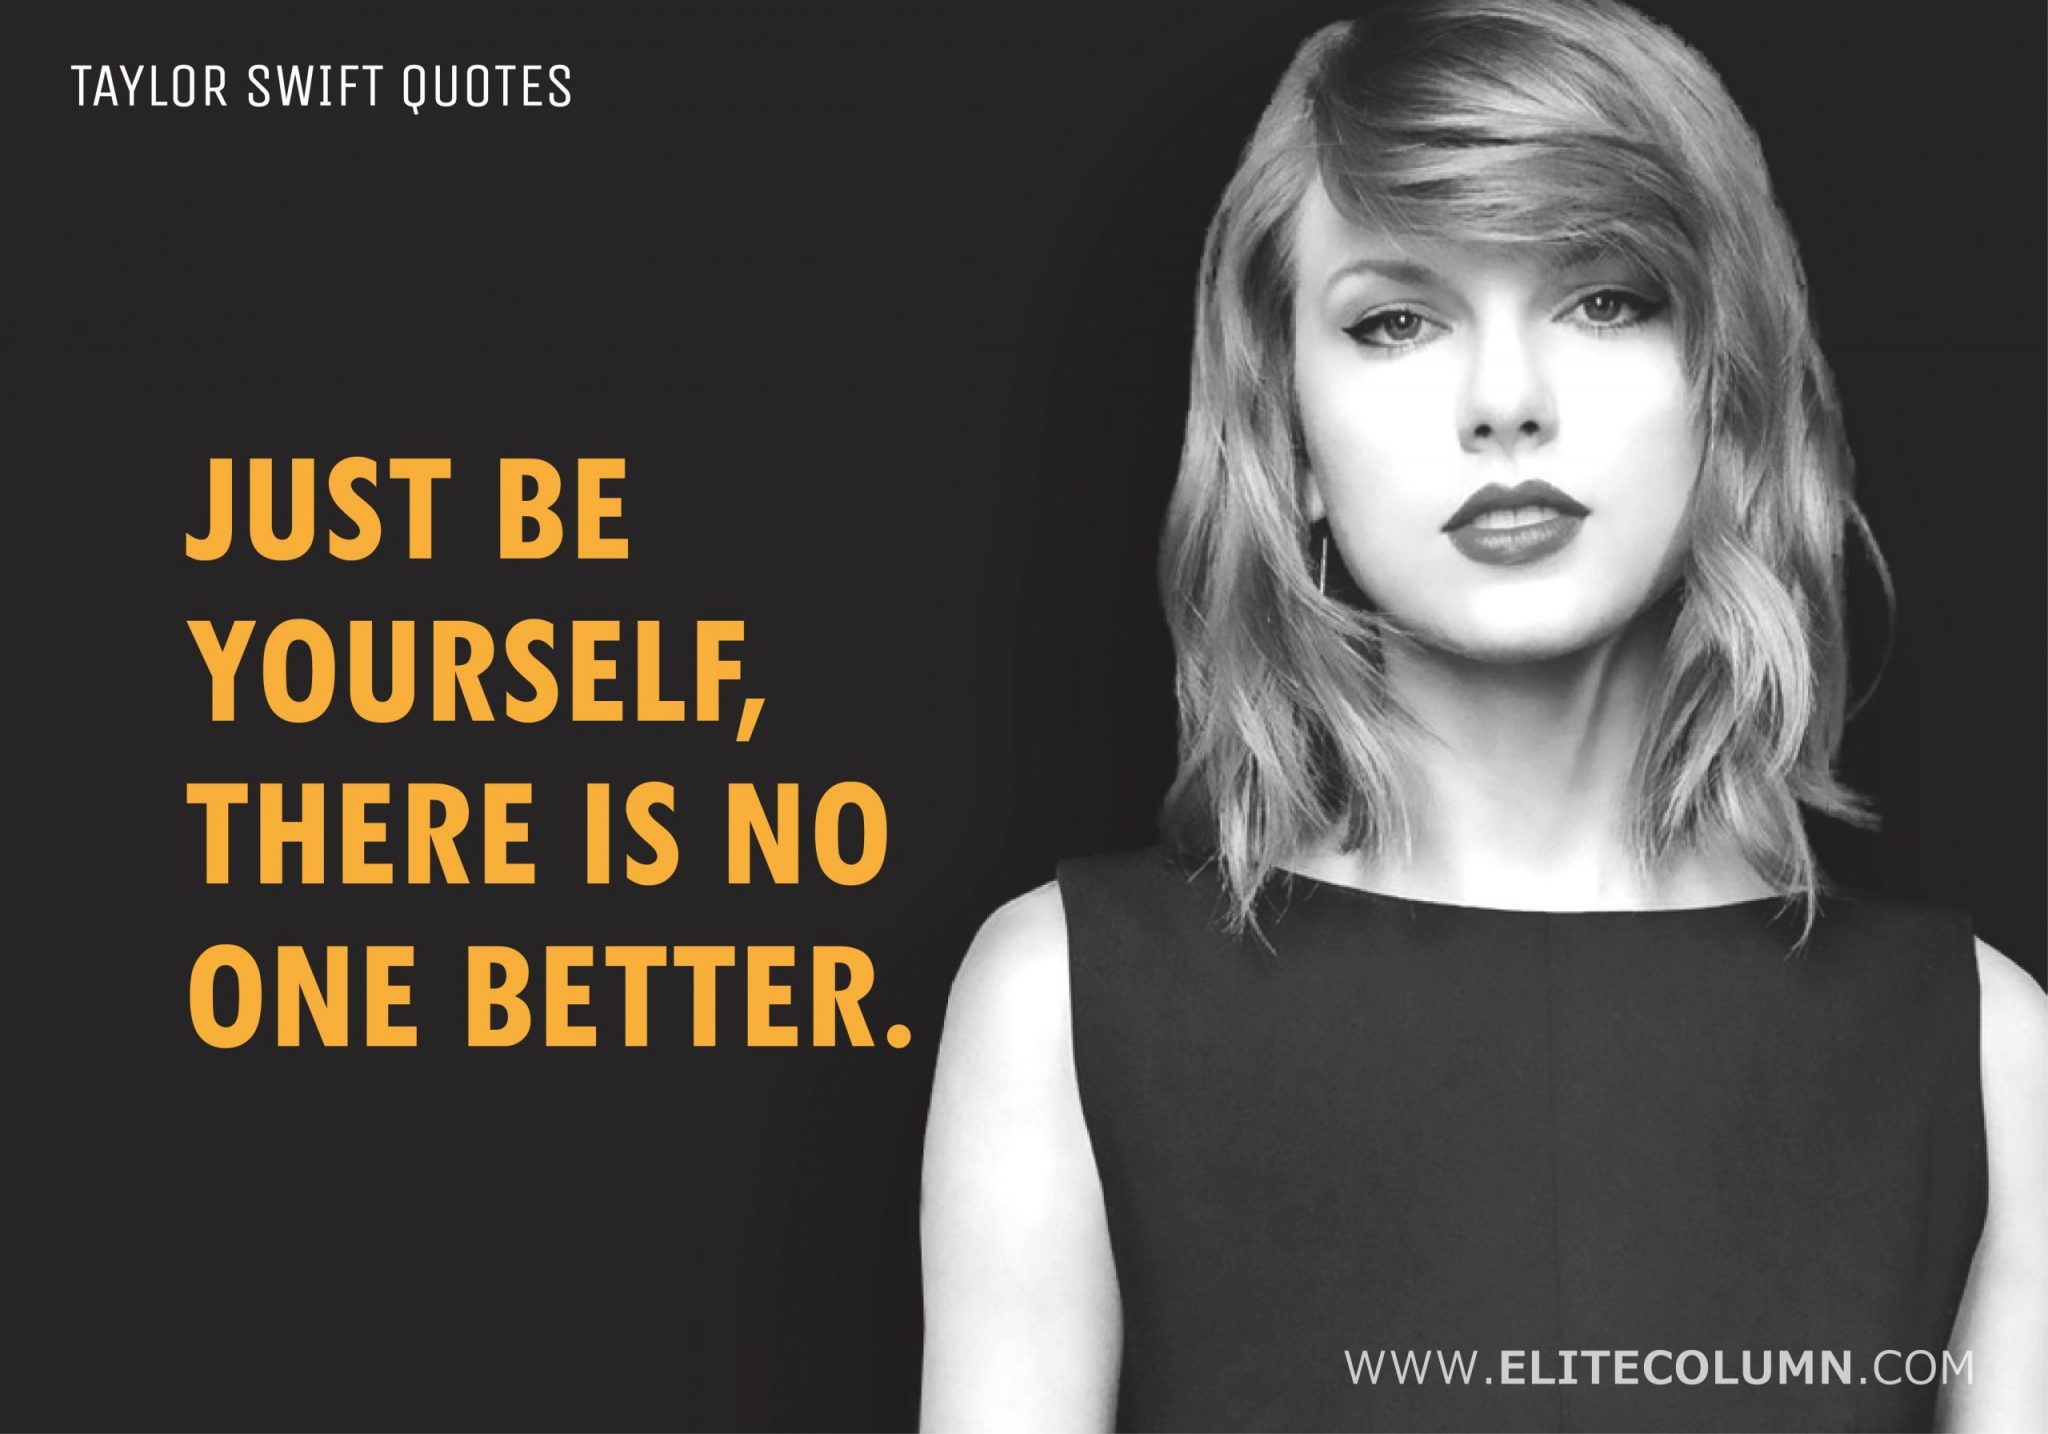 Taylor Swift Posters Taylor Swift Quotes Taylor Swift Album Long ...